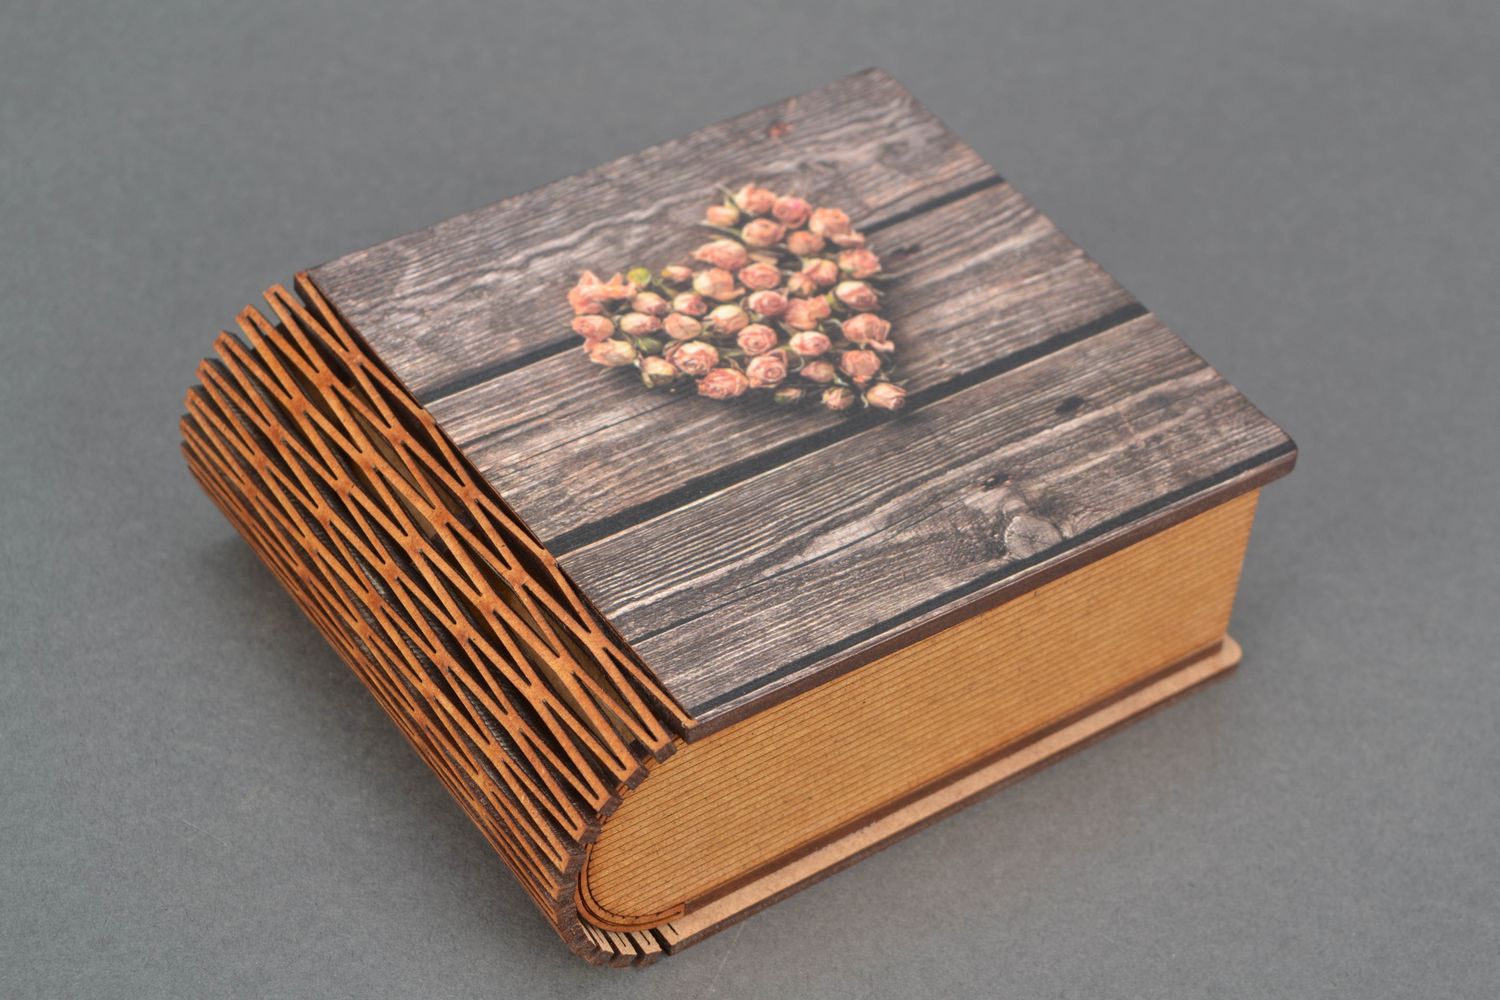 MDF jewelry box in the shape of book photo 1